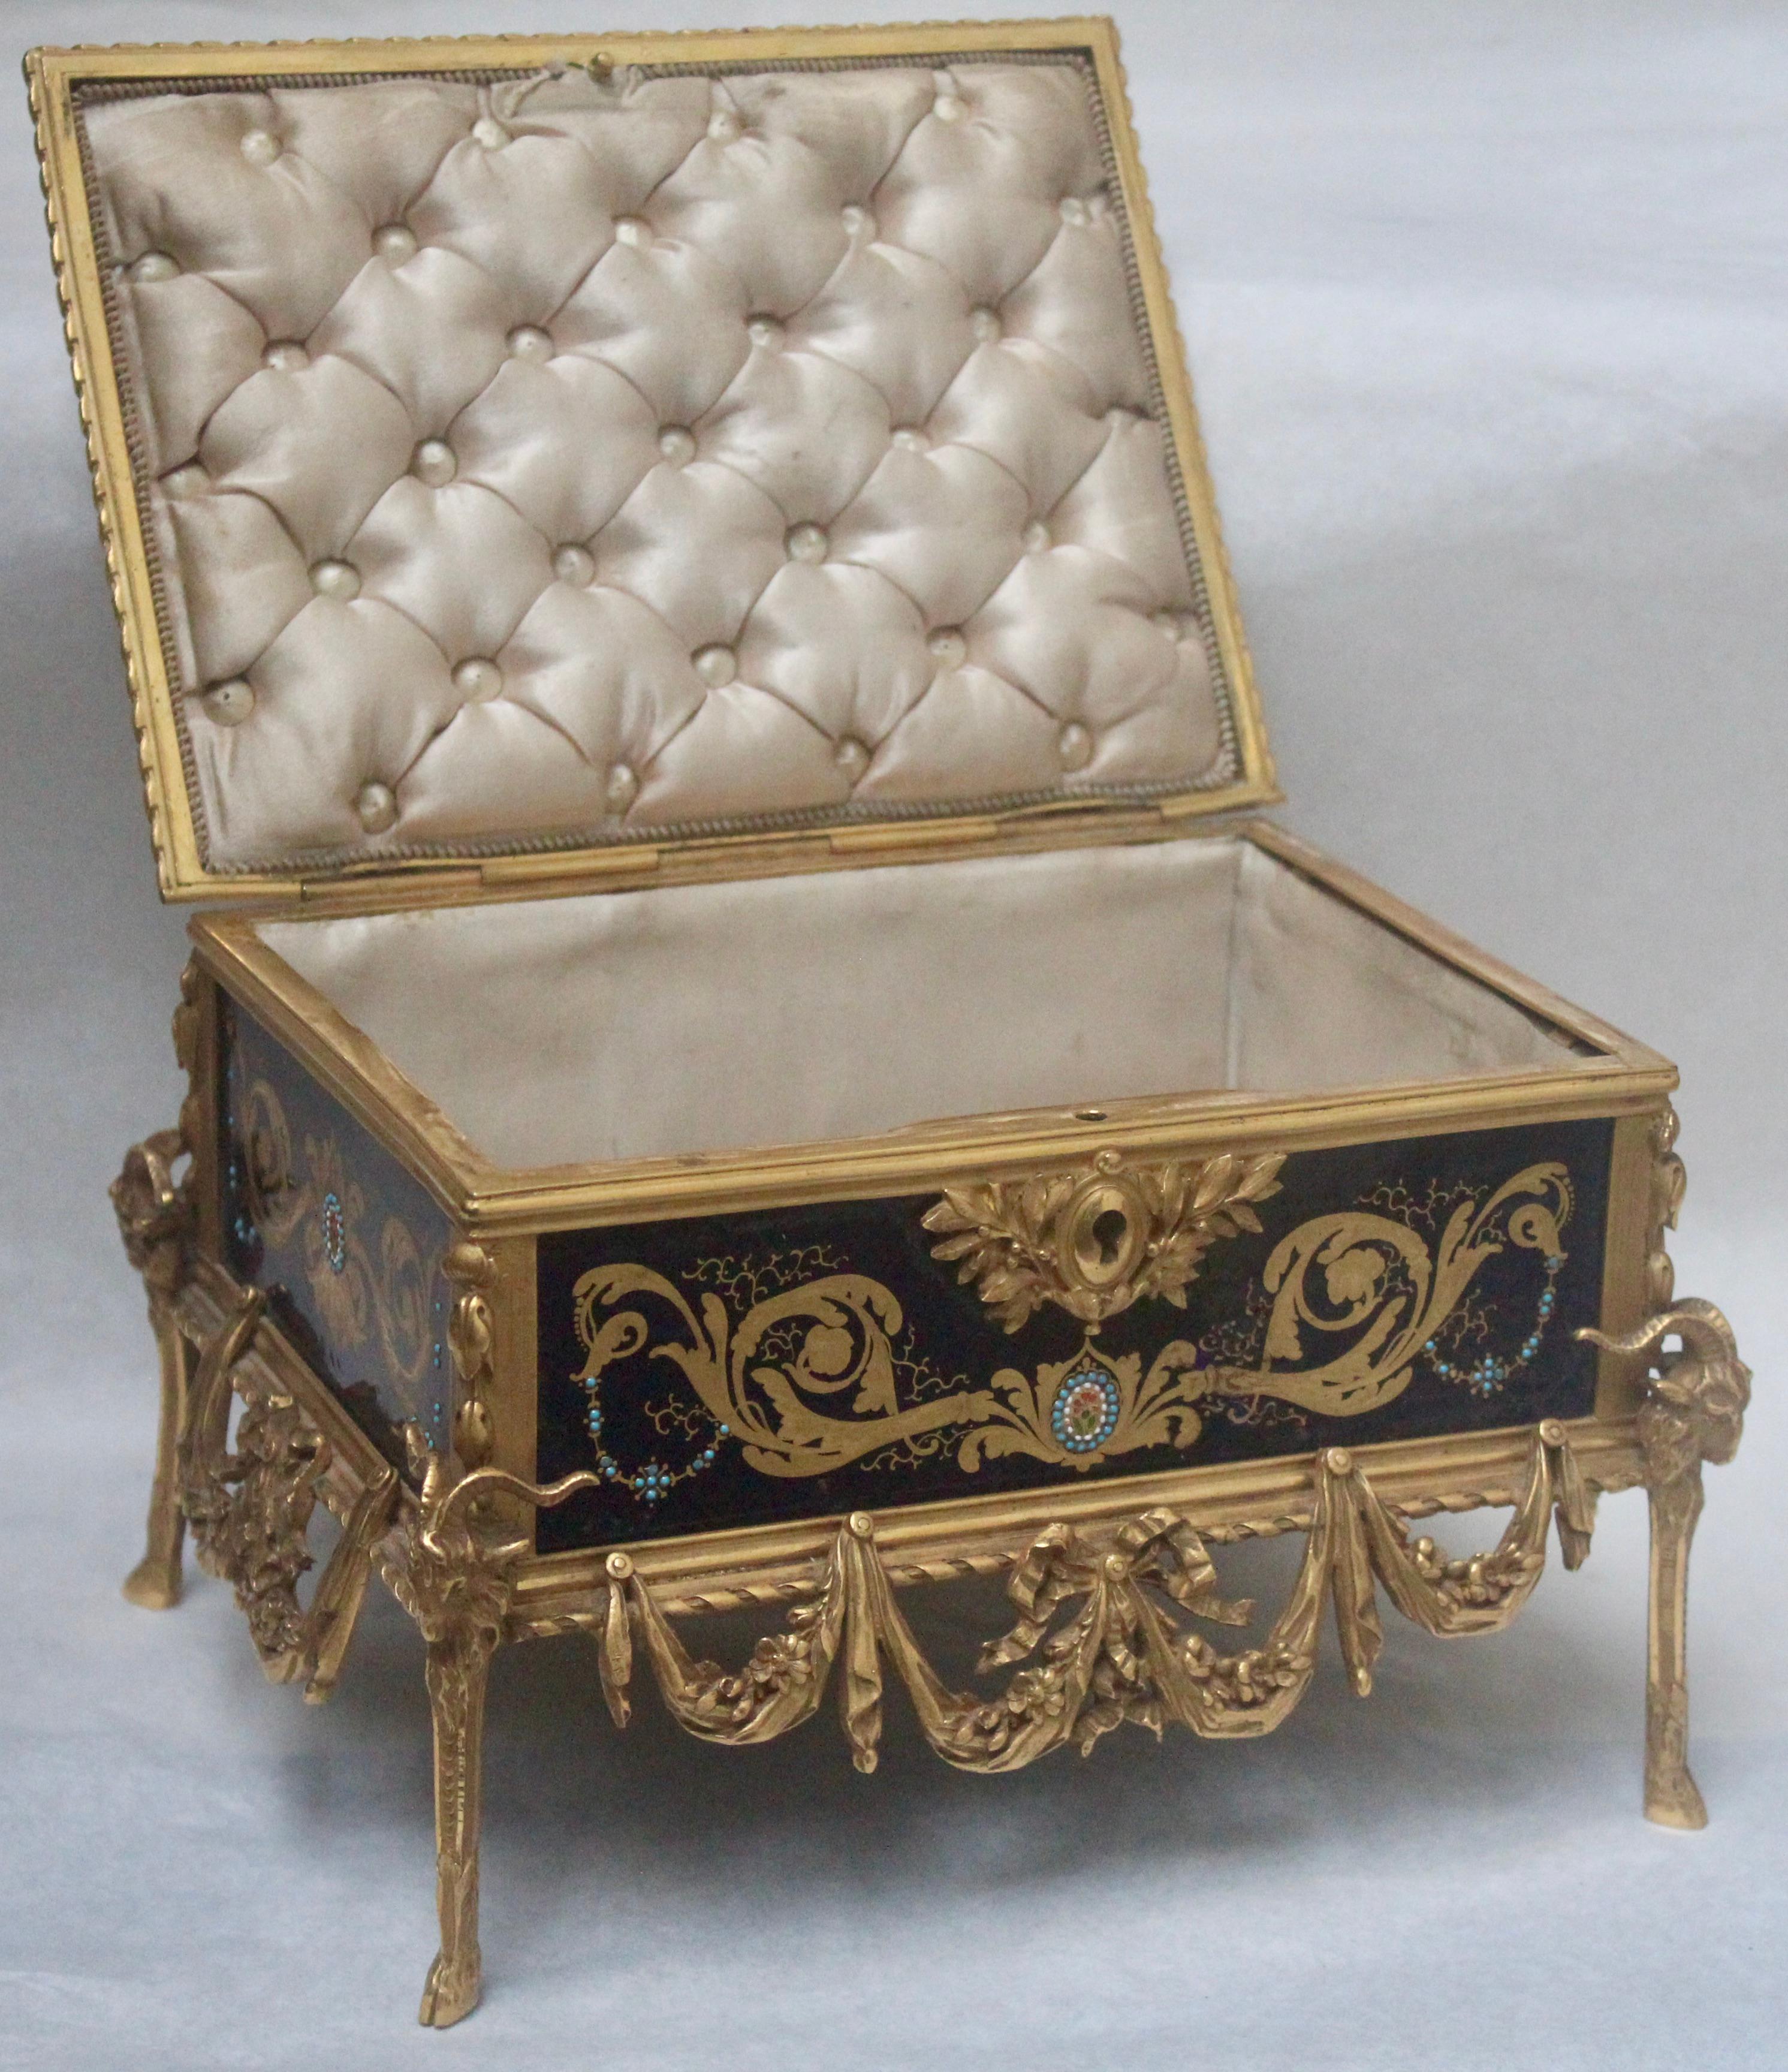 French 19th Century Enameled and Ormolu-Mounted Jewelry Casket 6